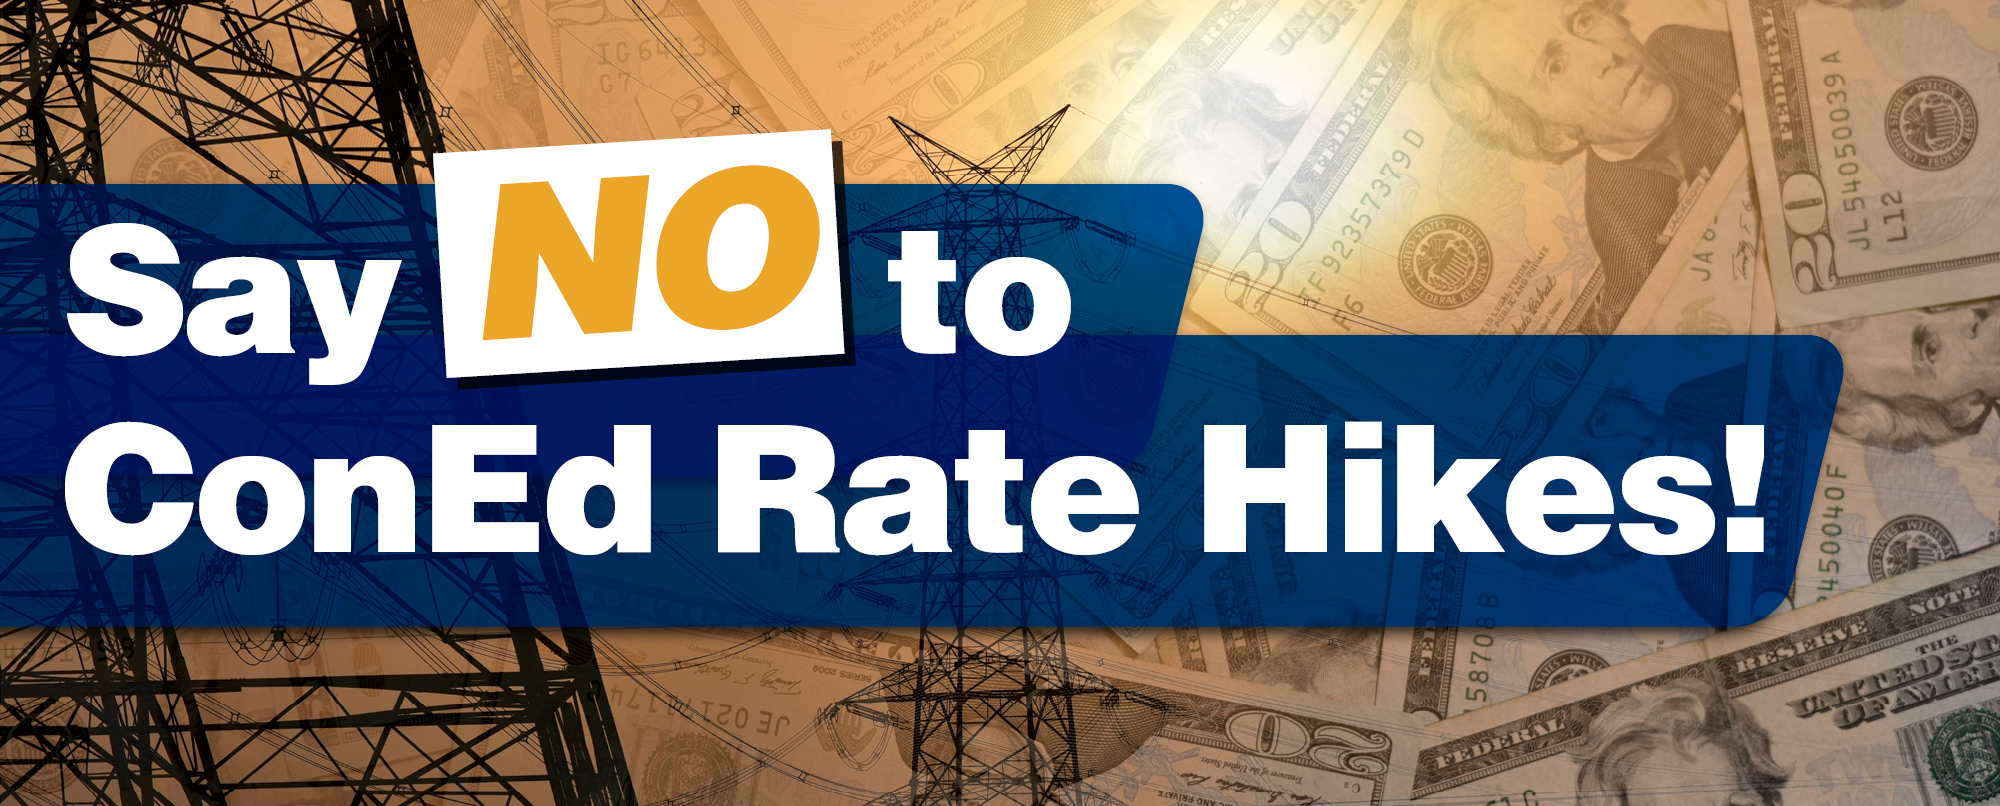 Tell the Public Service Commission: NO to ConEd Rate Hikes!